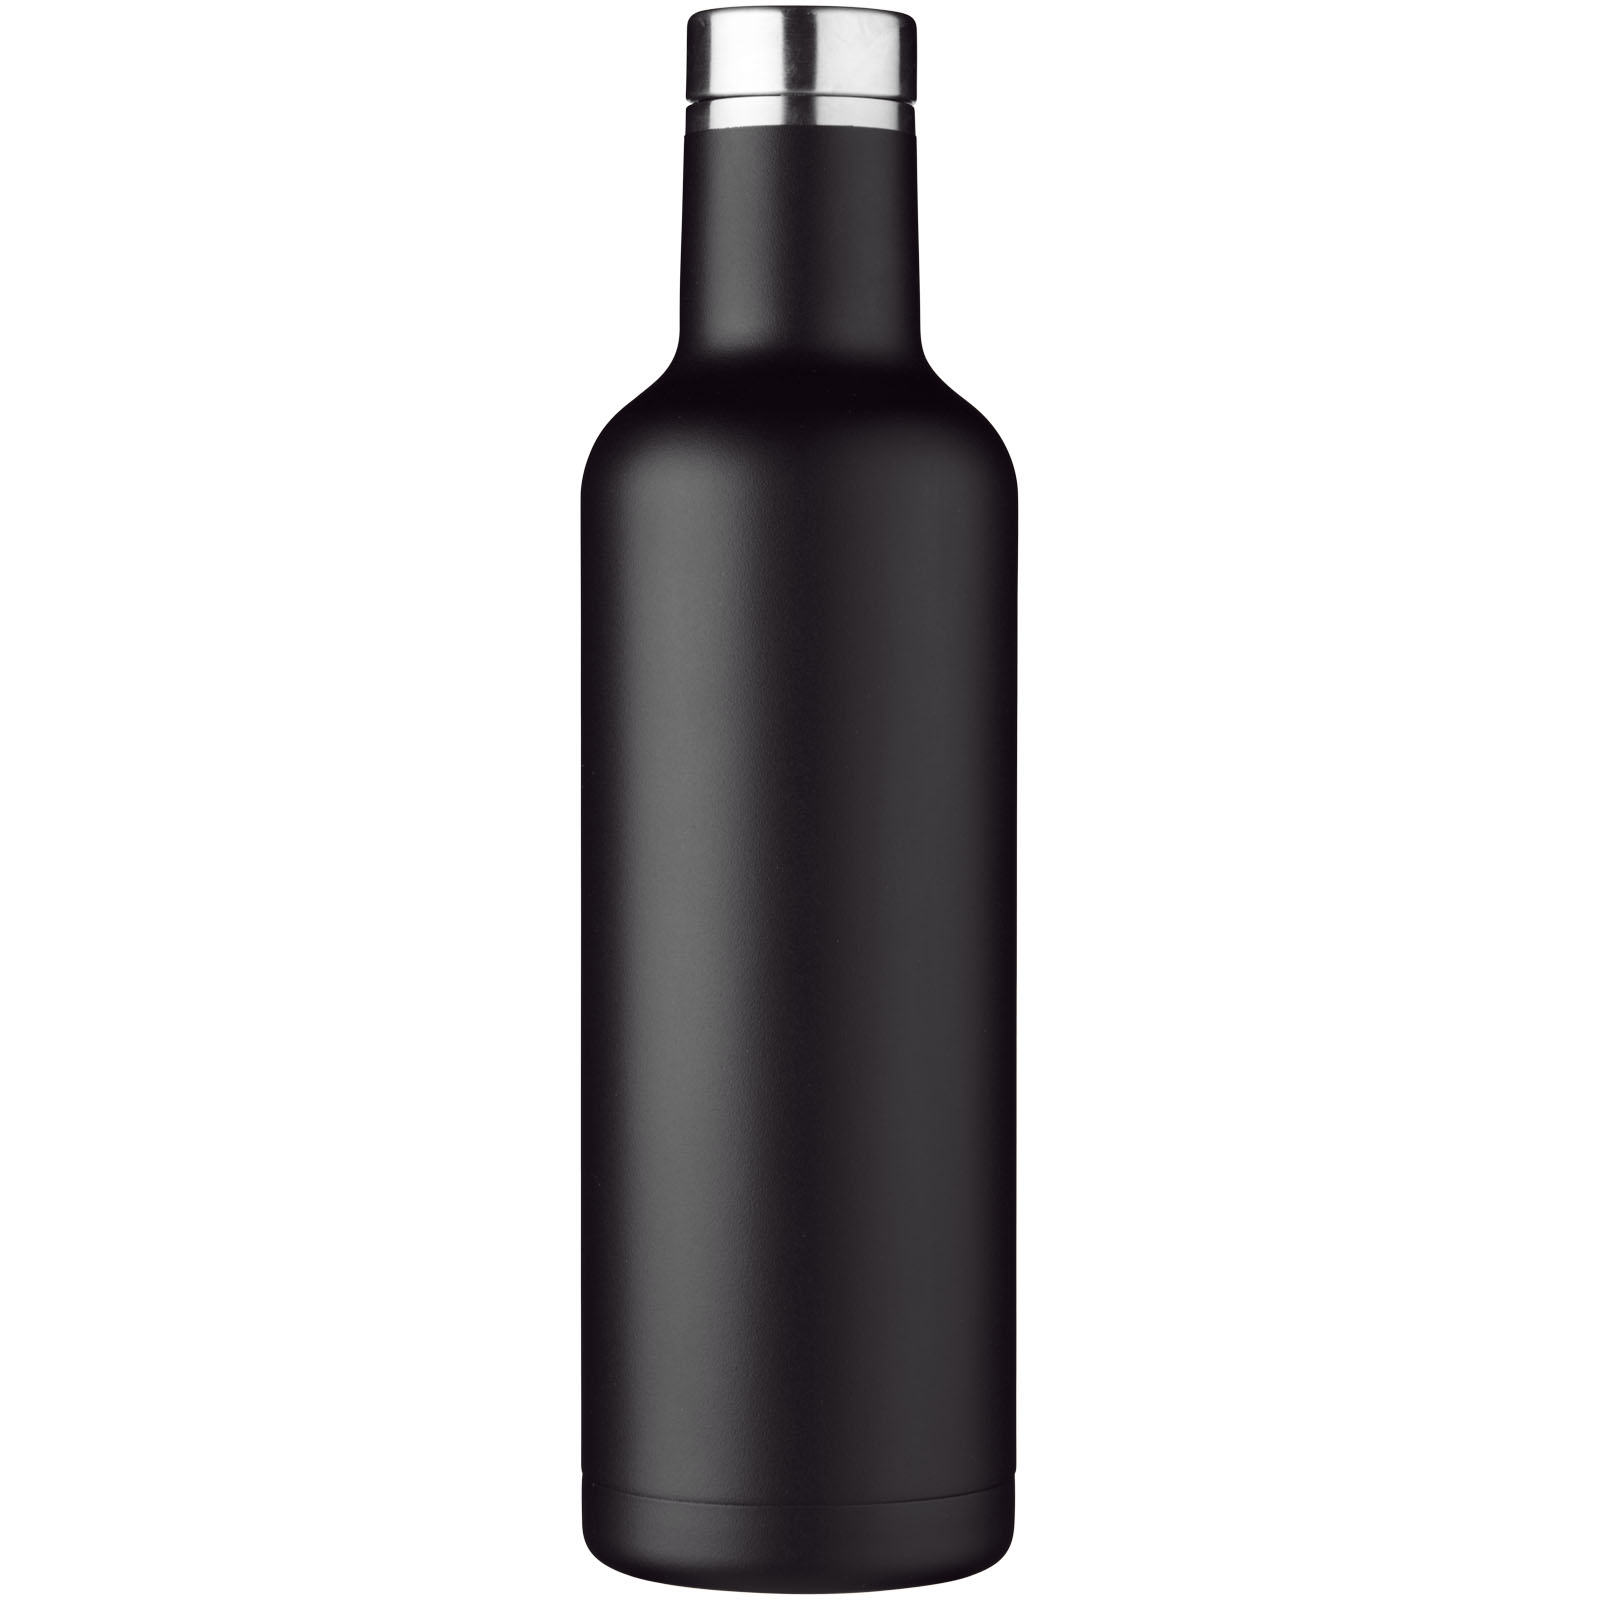 Advertising Insulated bottles - Pinto 750 ml copper vacuum insulated bottle - 1